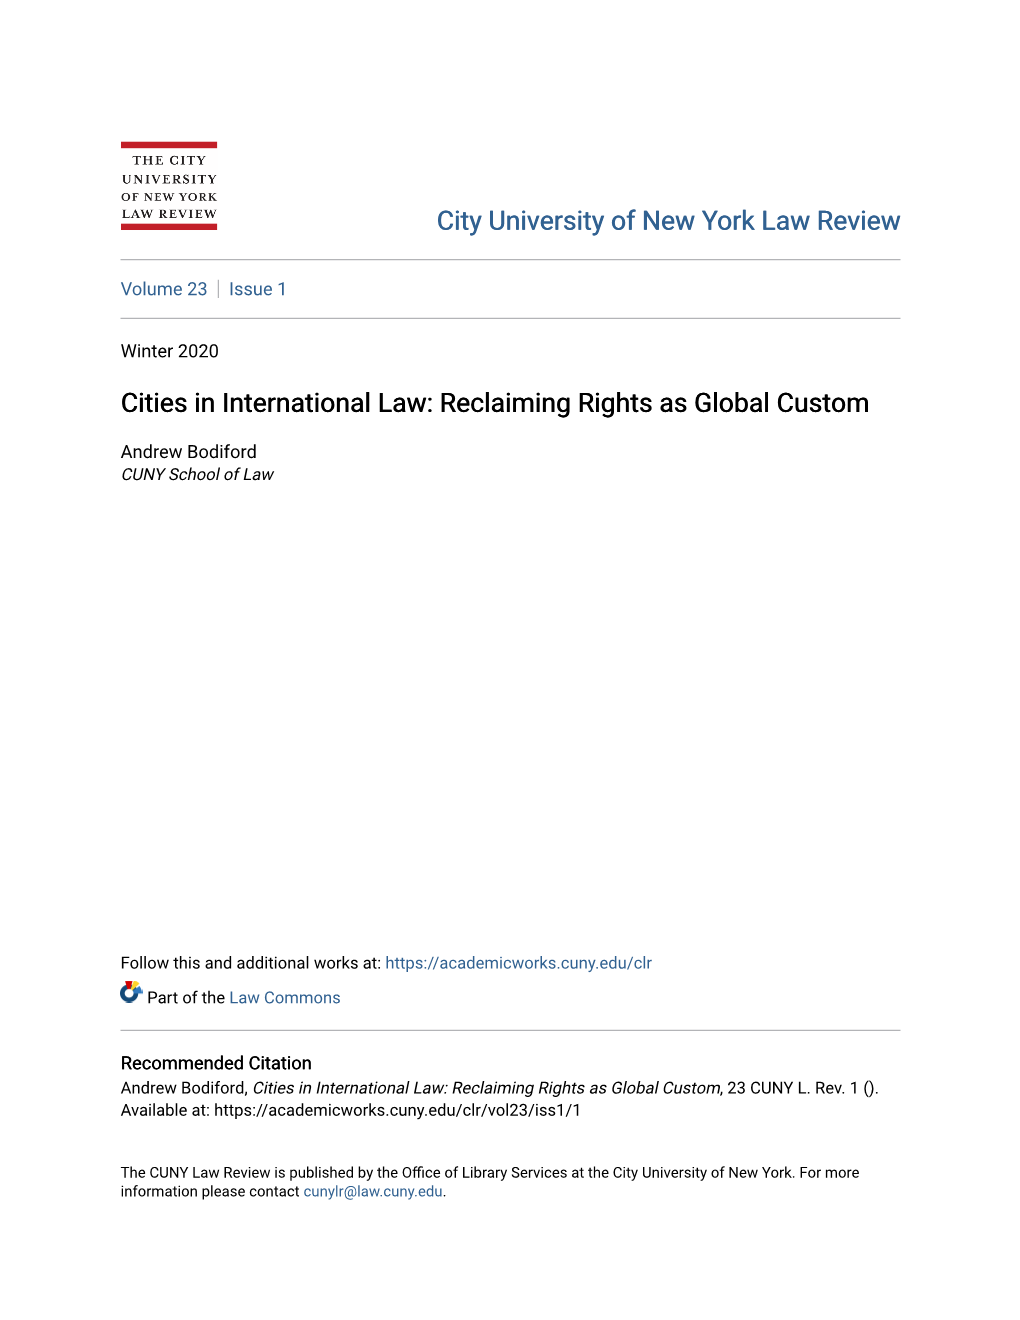 Cities in International Law: Reclaiming Rights As Global Custom